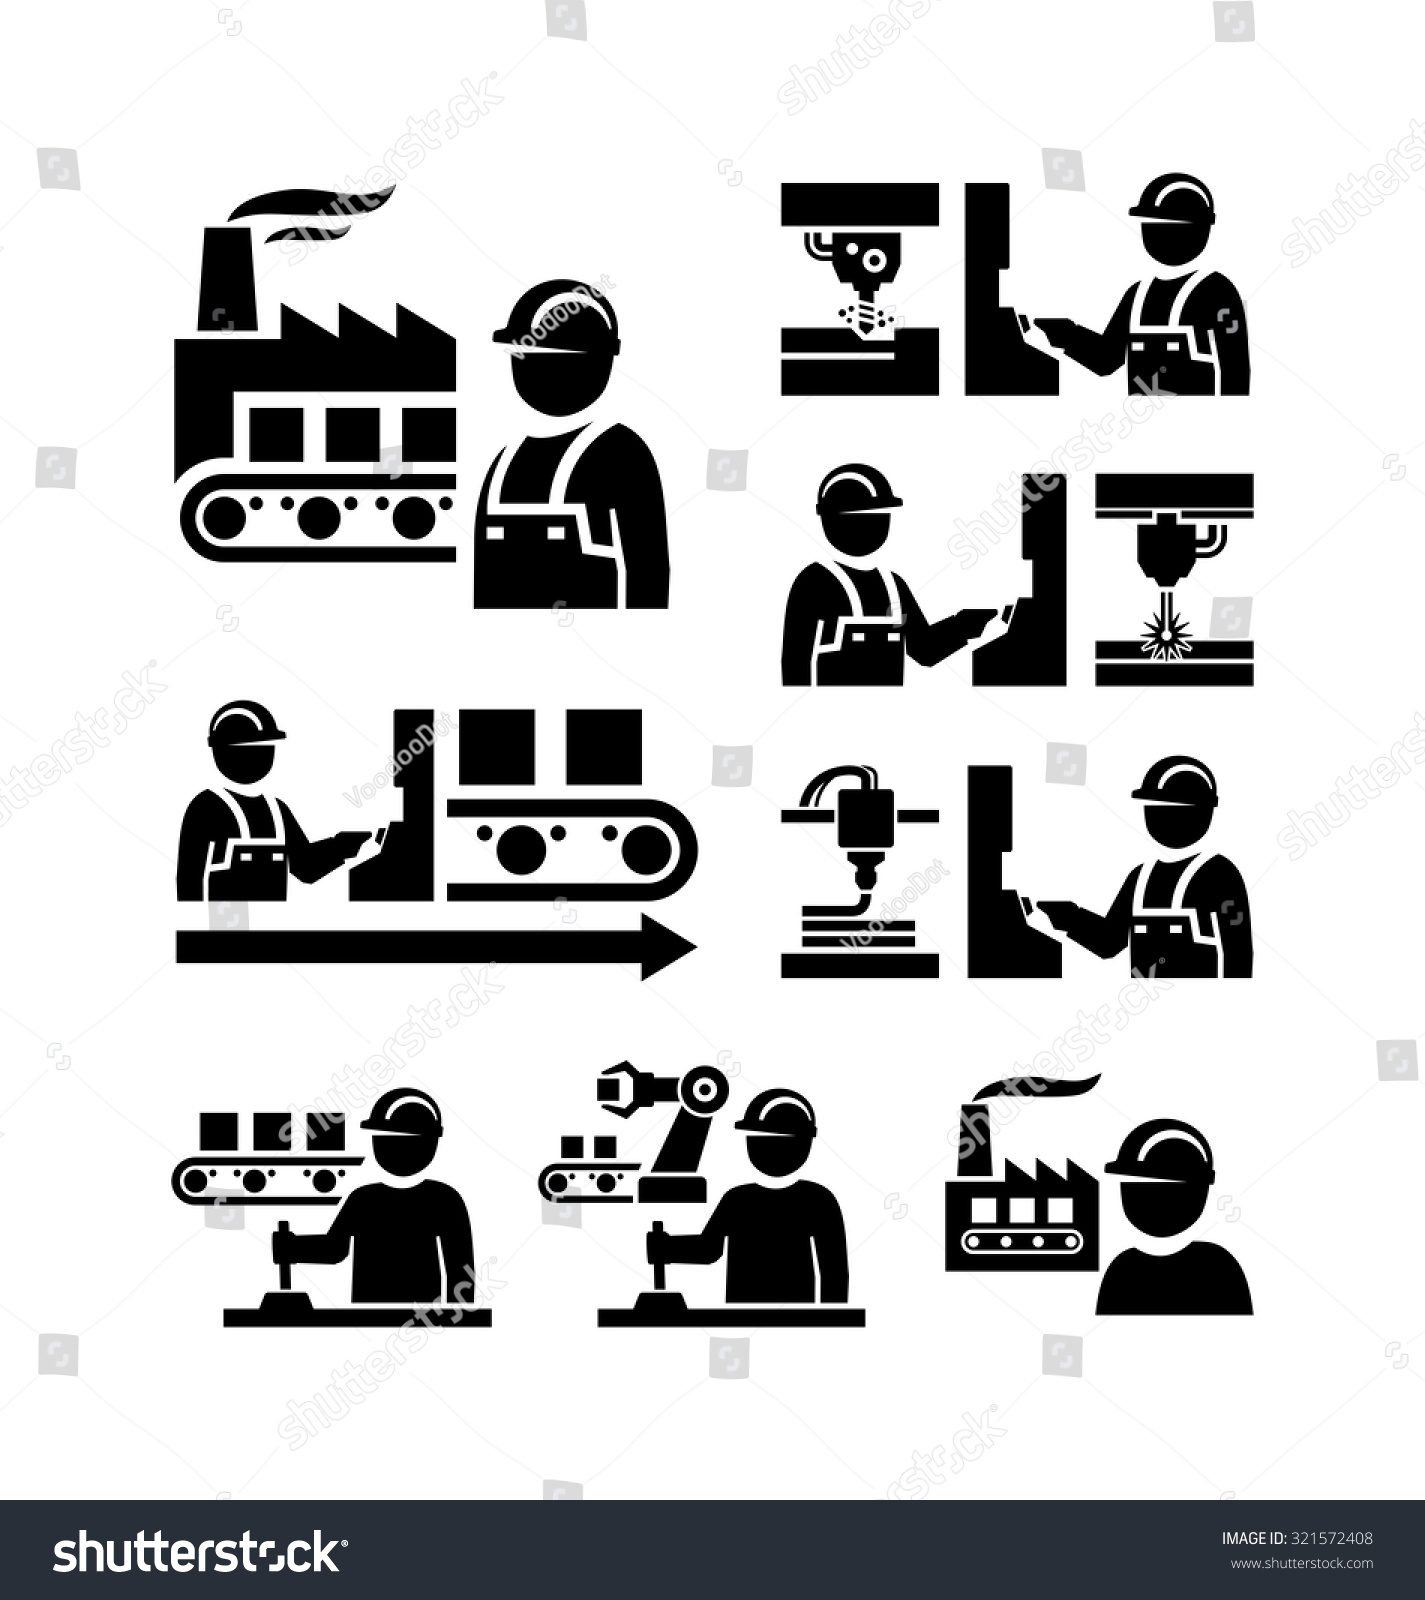 clipart production worker - photo #33